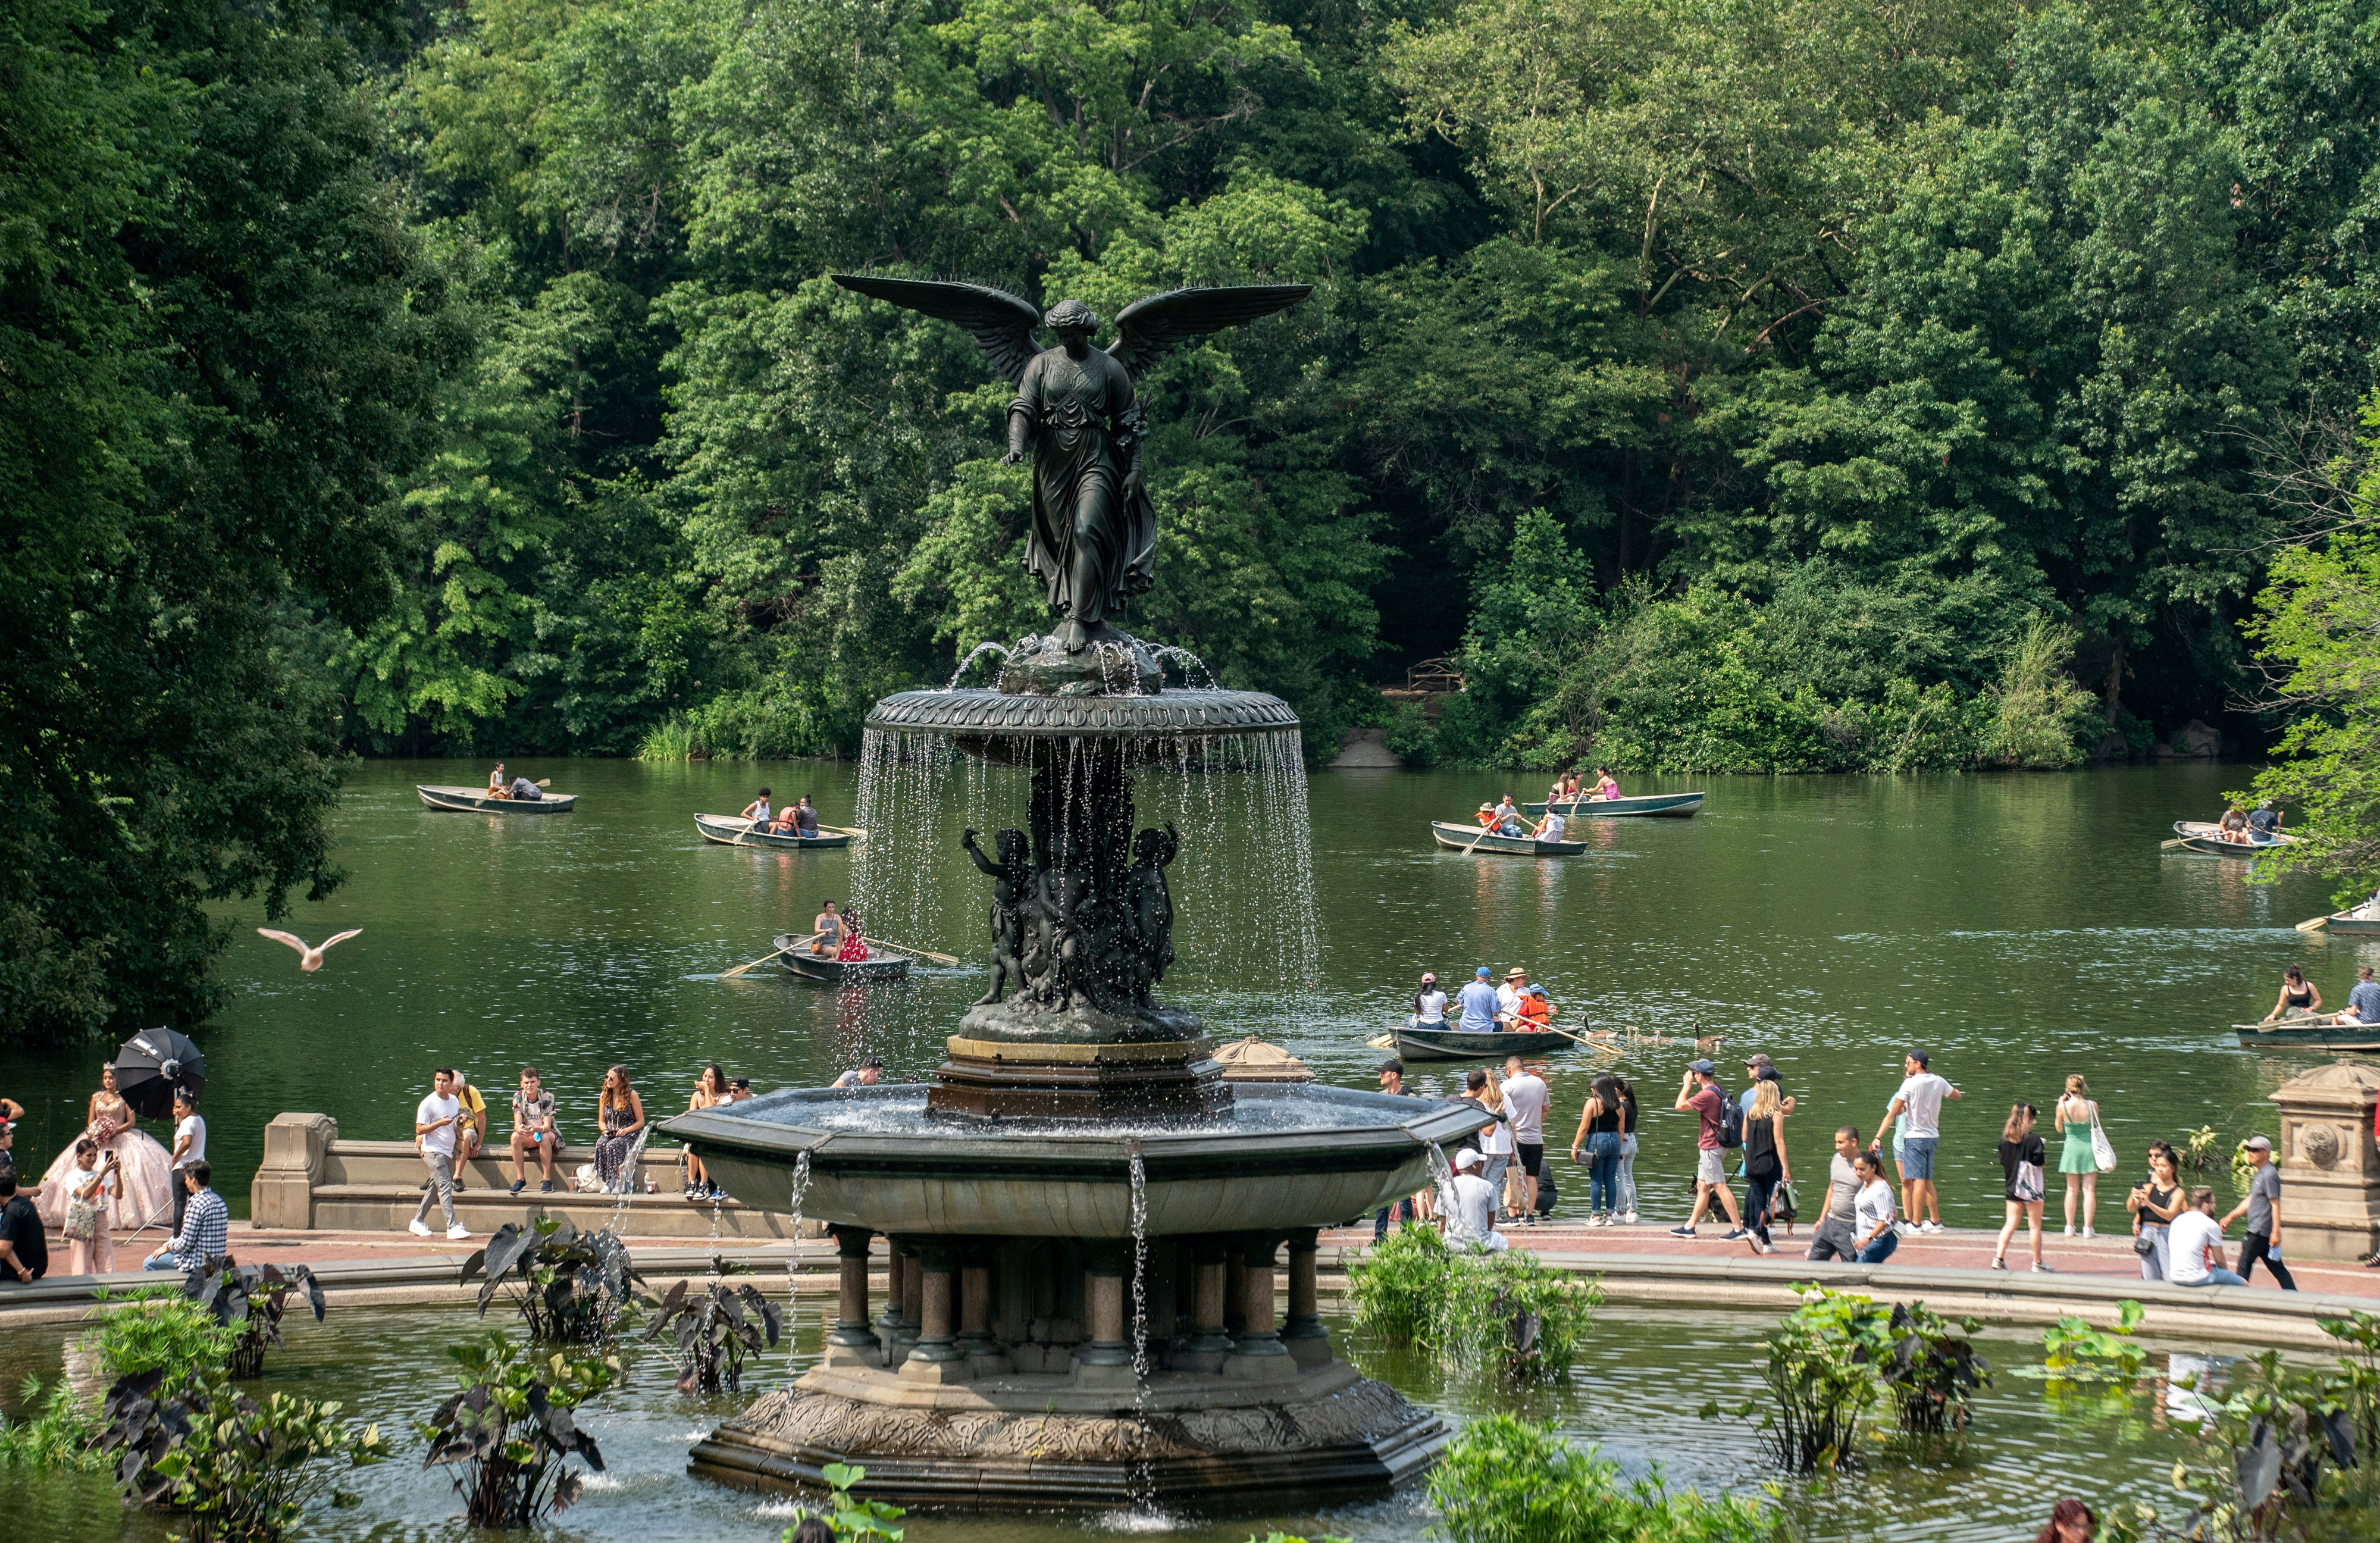 People row boats past the Bethesda Fountain in Central Park in New York City